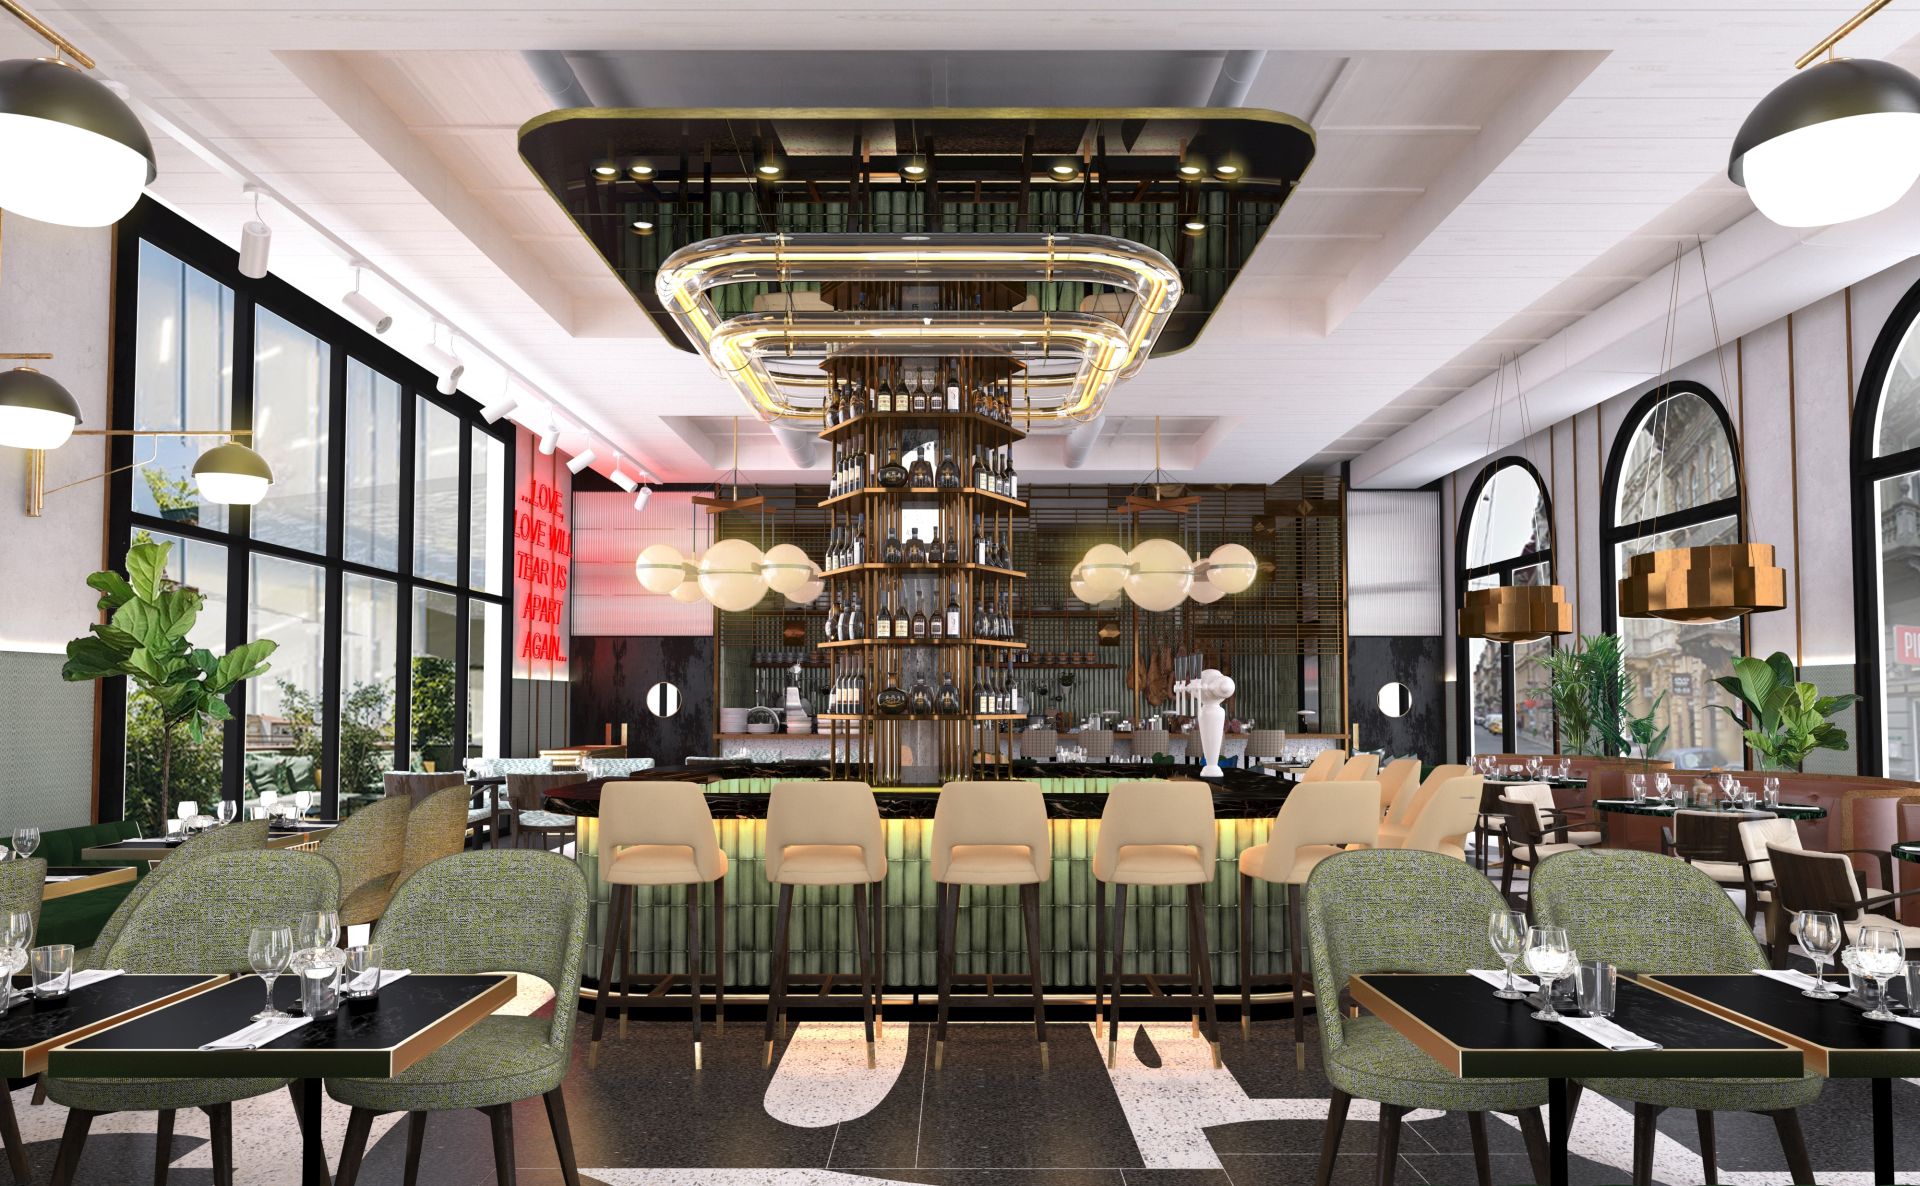 A Brand New Restaurant From Hard Rock Hotels Brings Fresh Vibes To Budapest